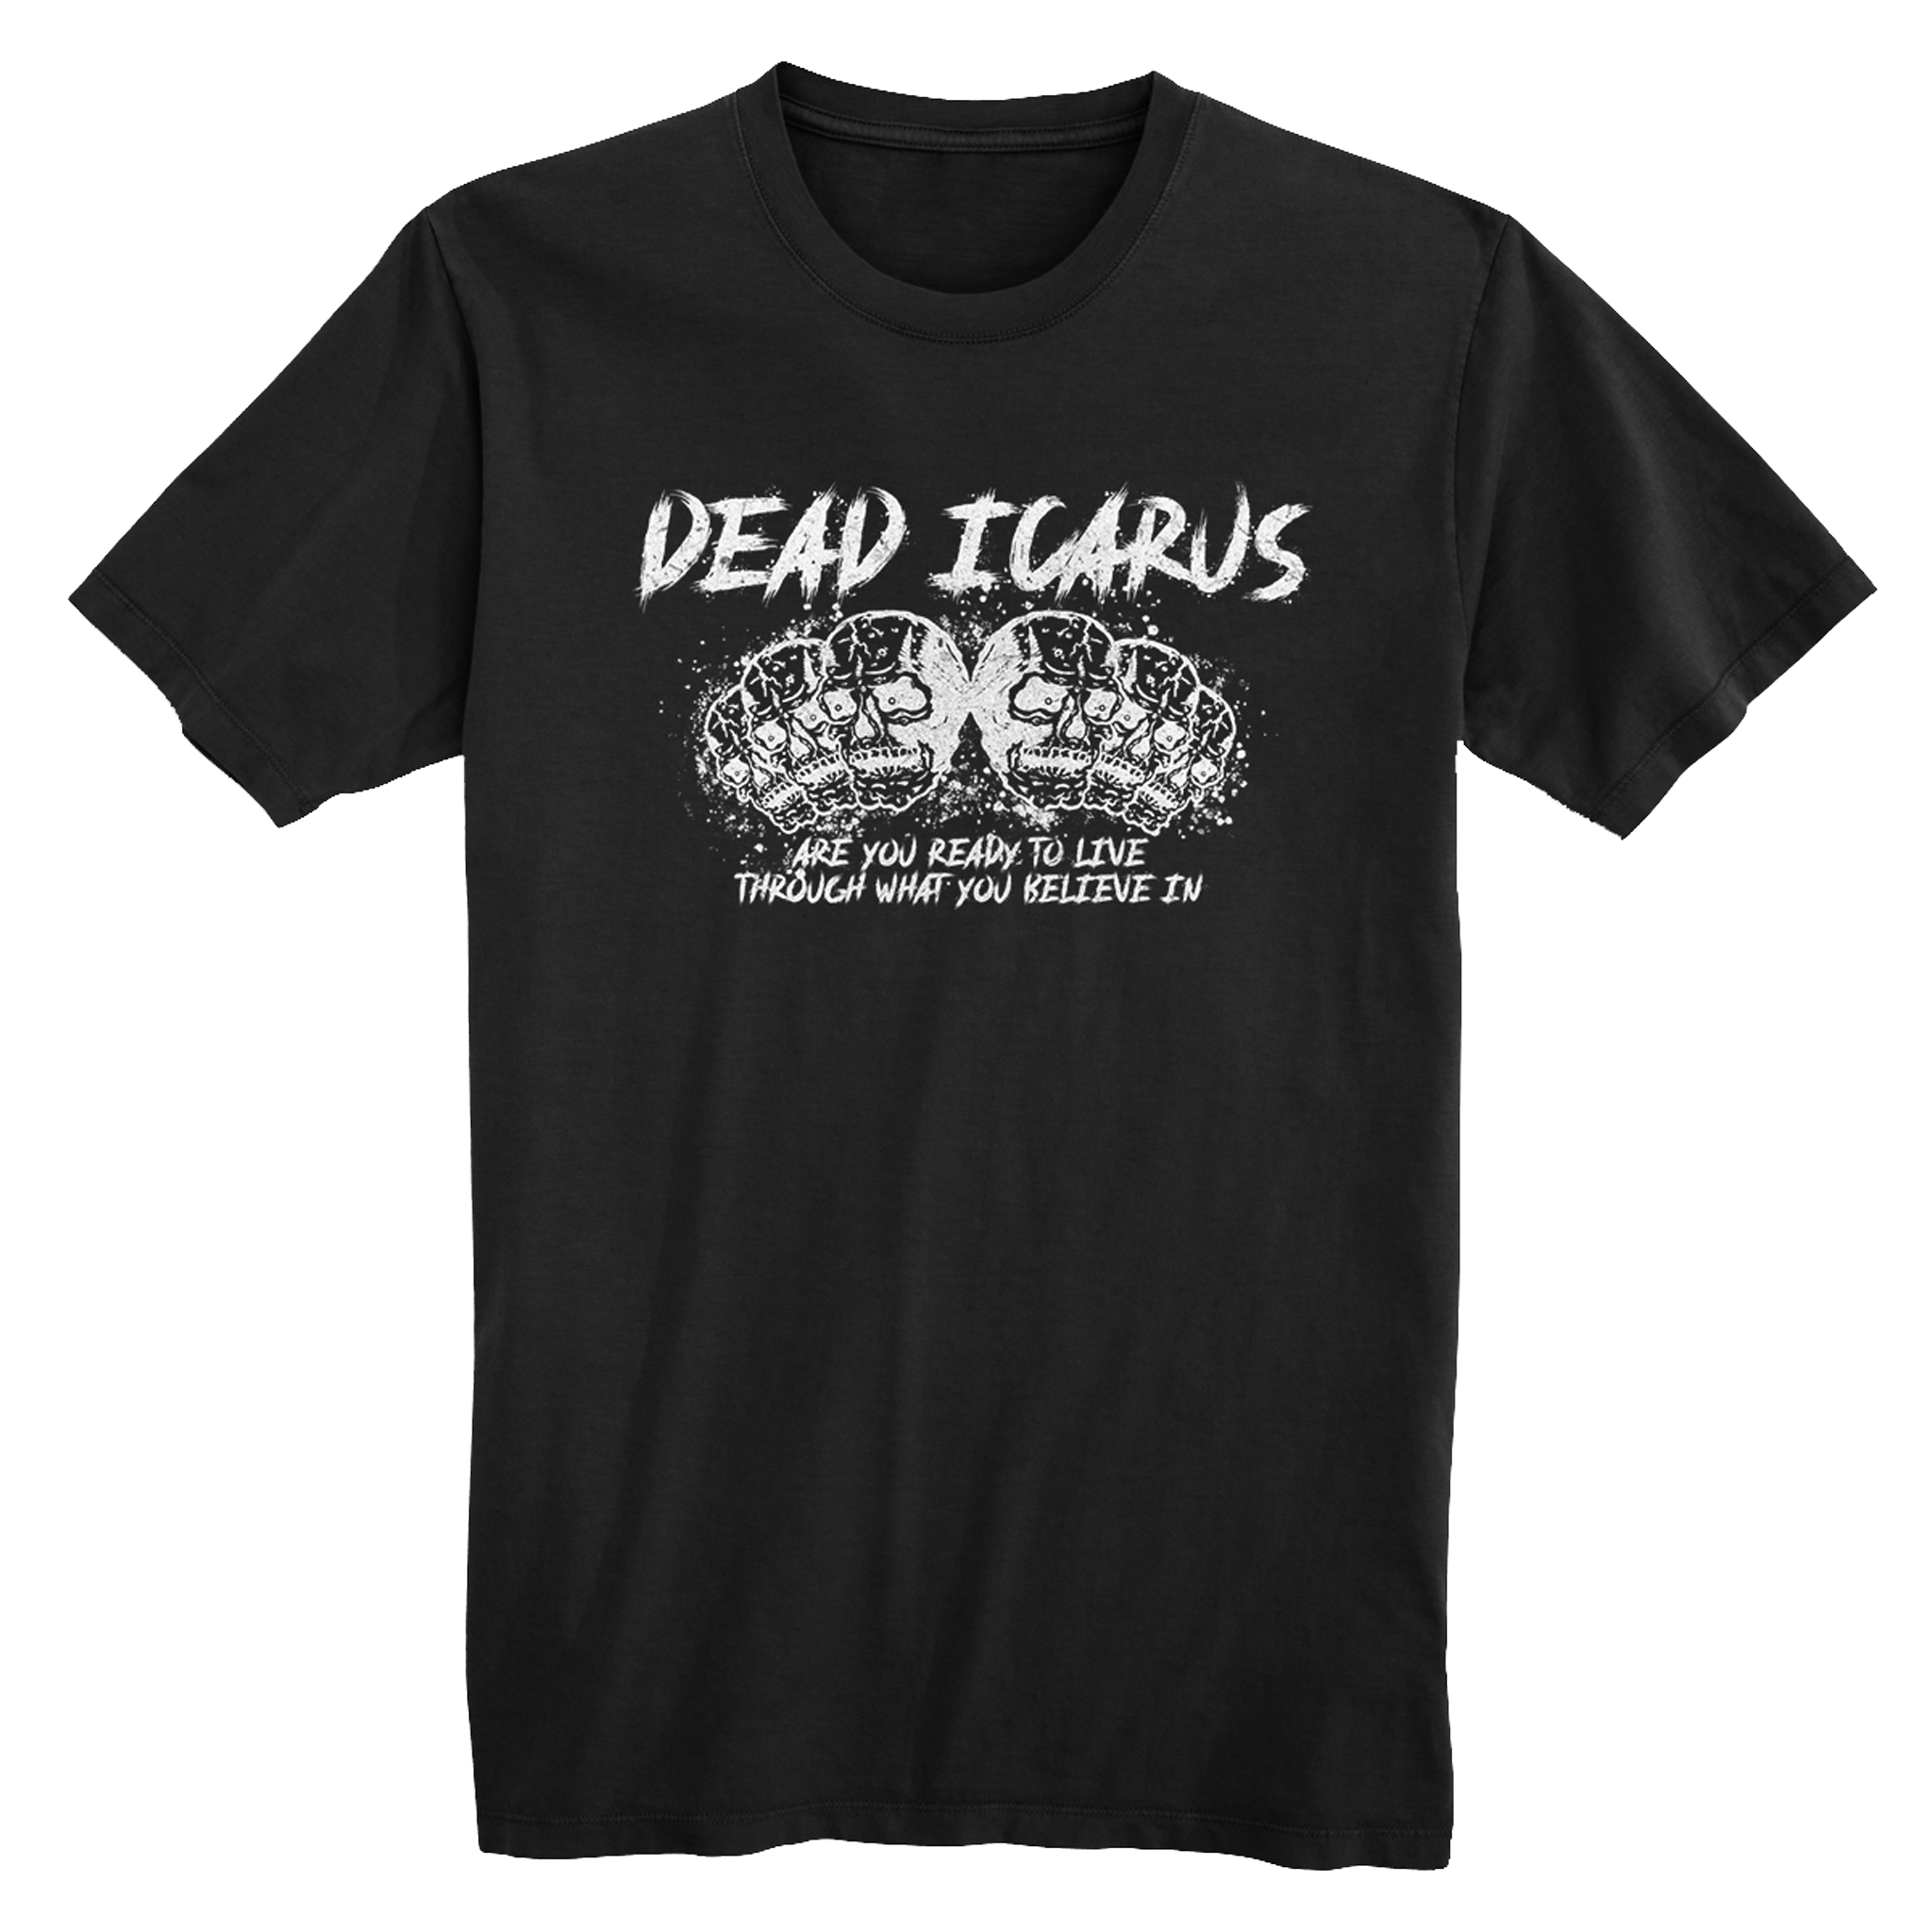 Officially Licensed Dead Icarus Merchandise